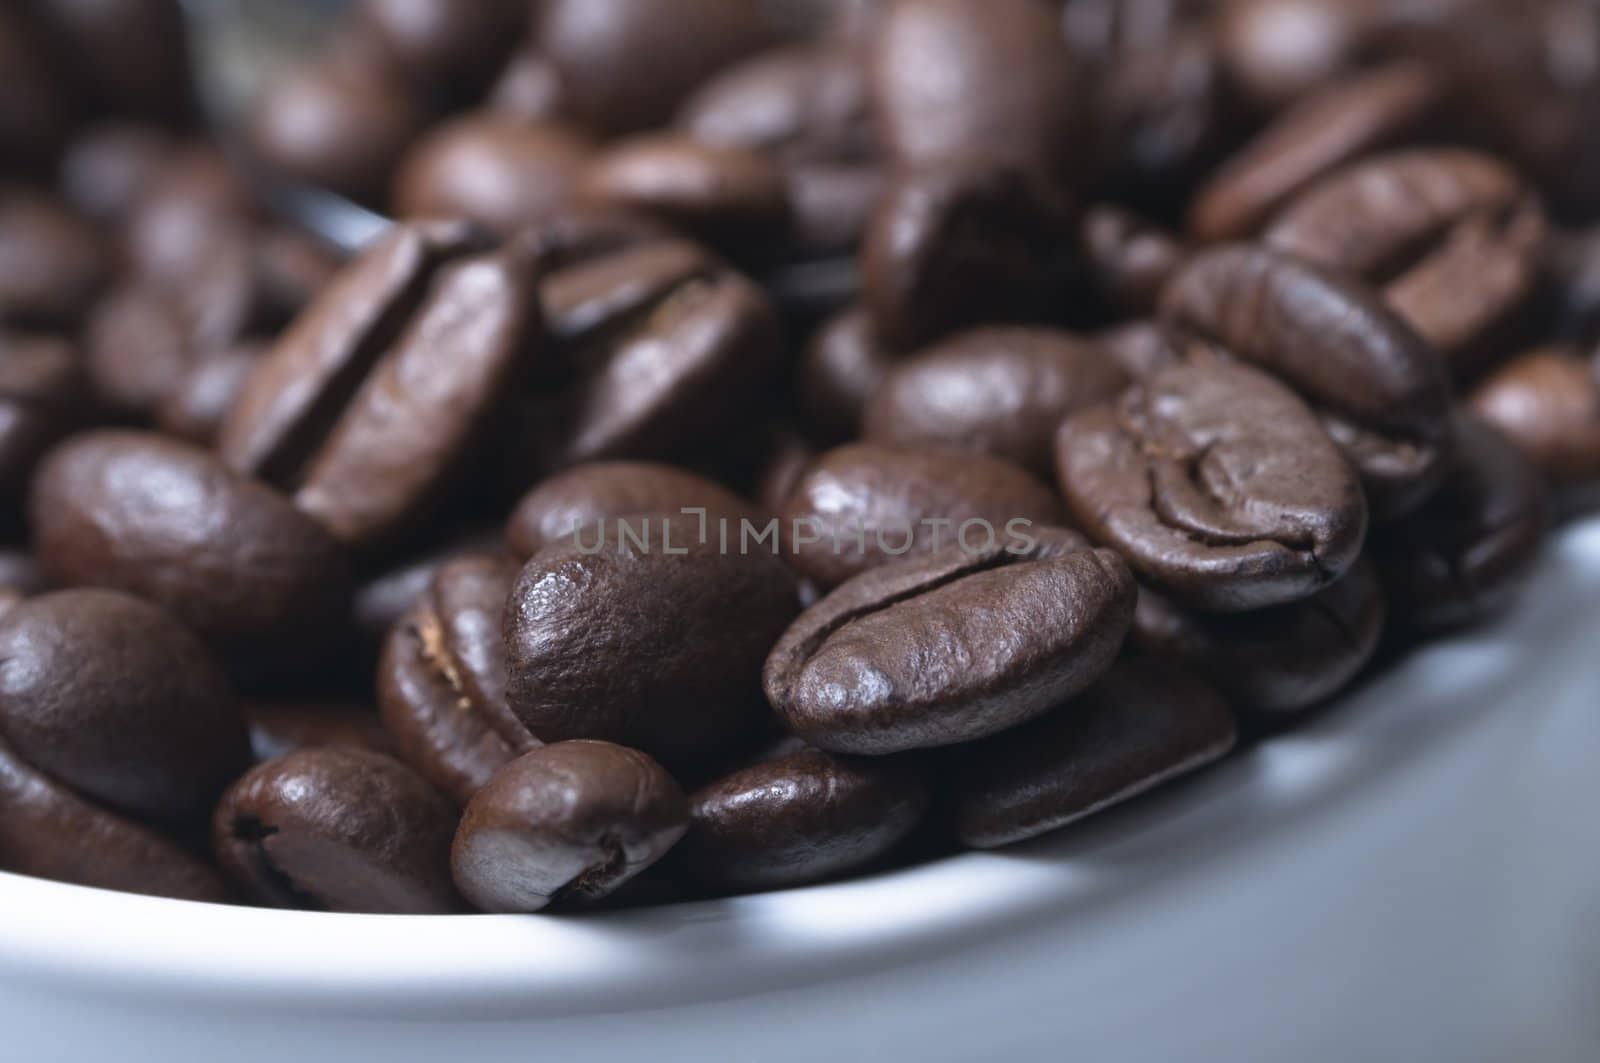 Close-up (macro) of coffee beans piled into a white china coffee cup.  Shallow depth of field with silver spoon just visible in soft focus.